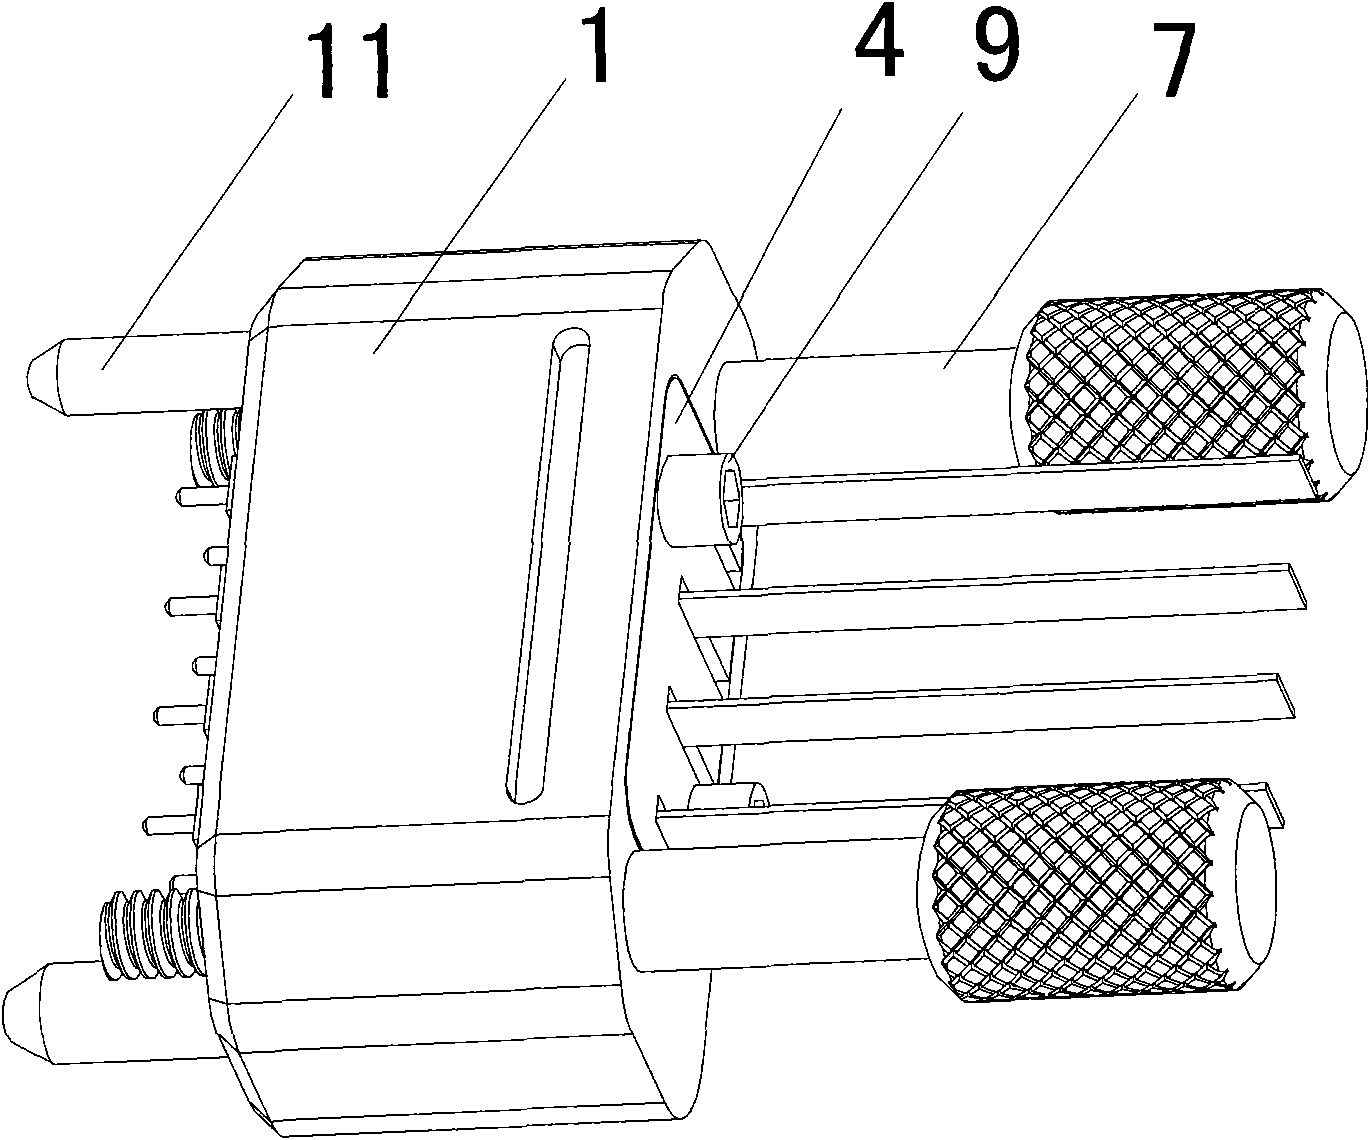 Optical fiber connector integrated with a plurality of rectangular multi-core optical fiber contact pins and integrated connector